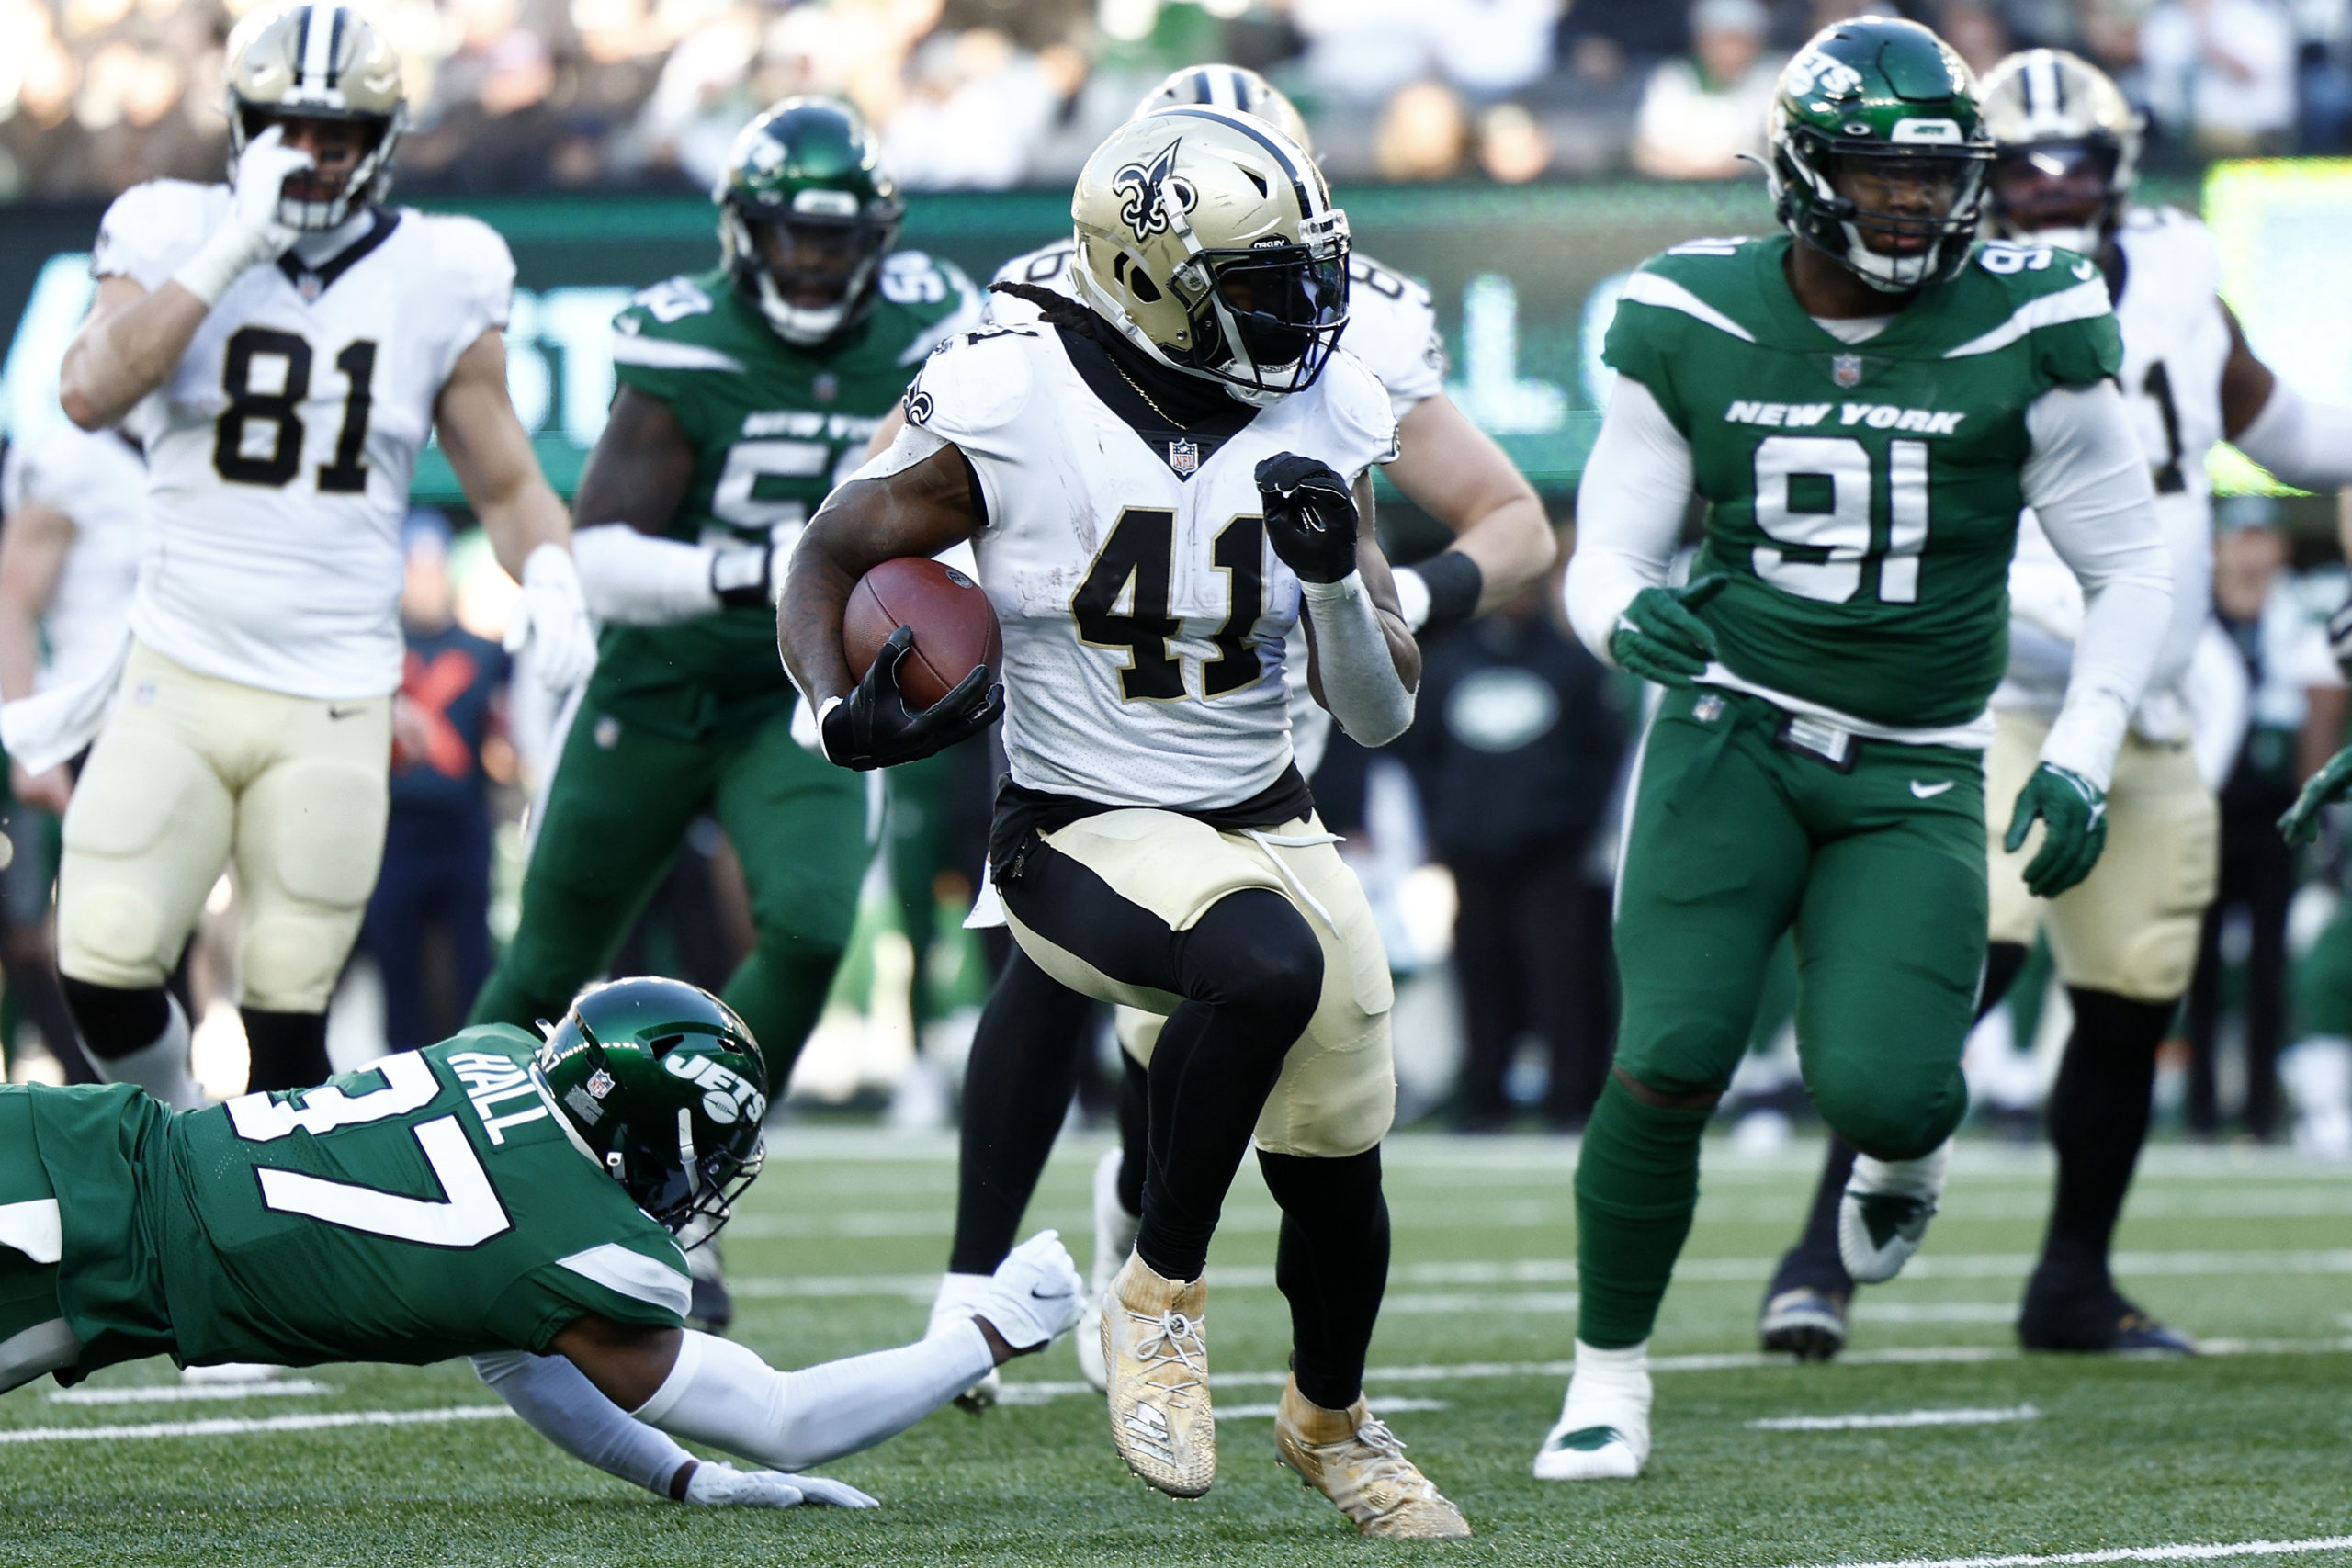 EAST RUTHERFORD, NEW JERSEY - DECEMBER 12: Alvin Kamara #41 of the New Orleans Saints runs with the ball on his way to a rushing touchdown past Bryce Hall #37 of the New York Jets in the second quarter at MetLife Stadium on December 12, 2021 in East Rutherford, New Jersey. (Photo by Sarah Stier/Getty Images)